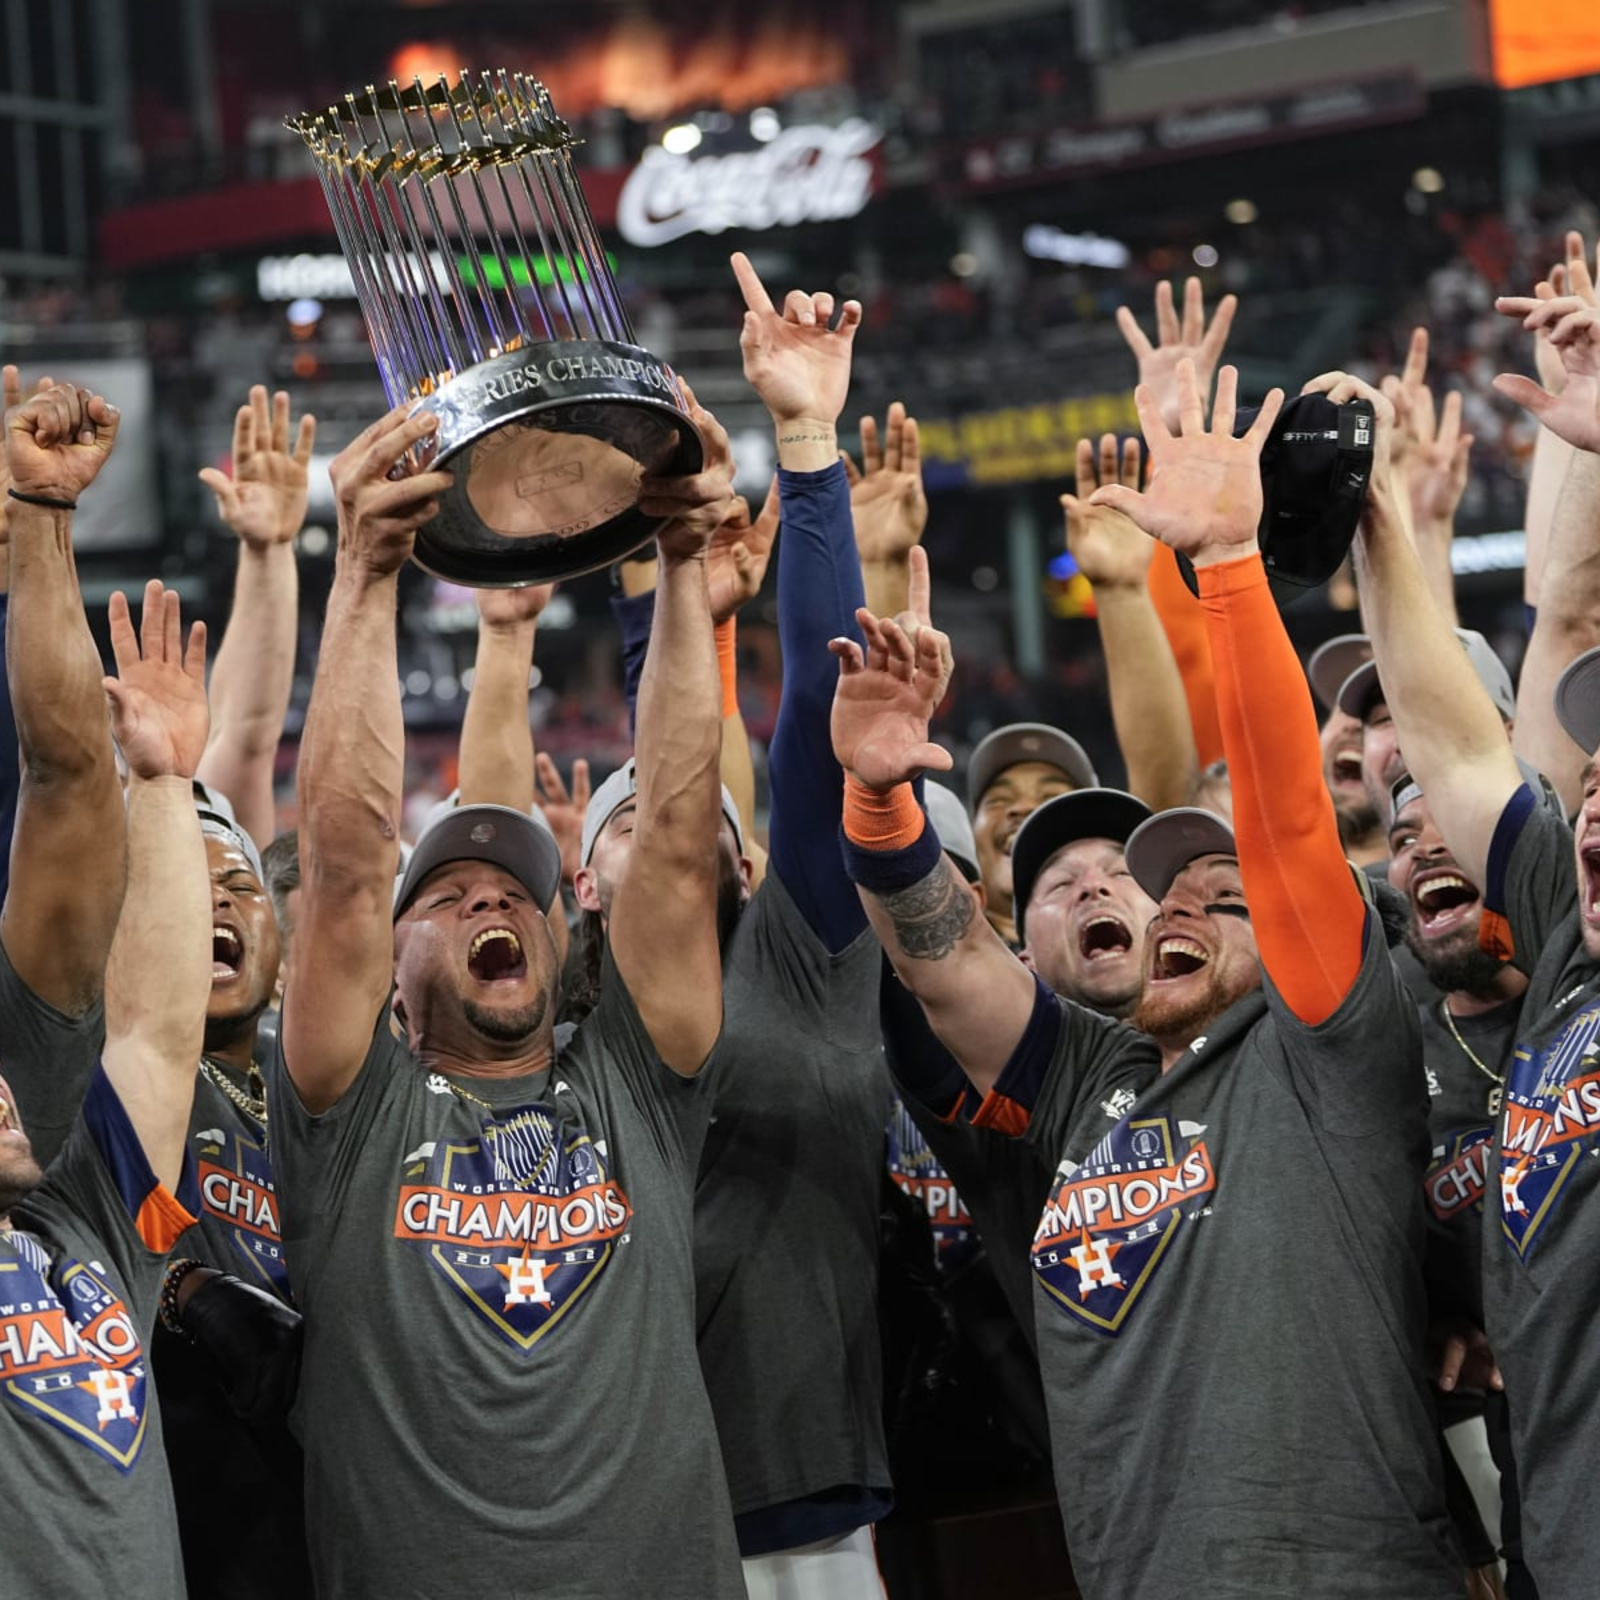 Astros parade 2017: Route, map, and road closures for World Series  celebration 